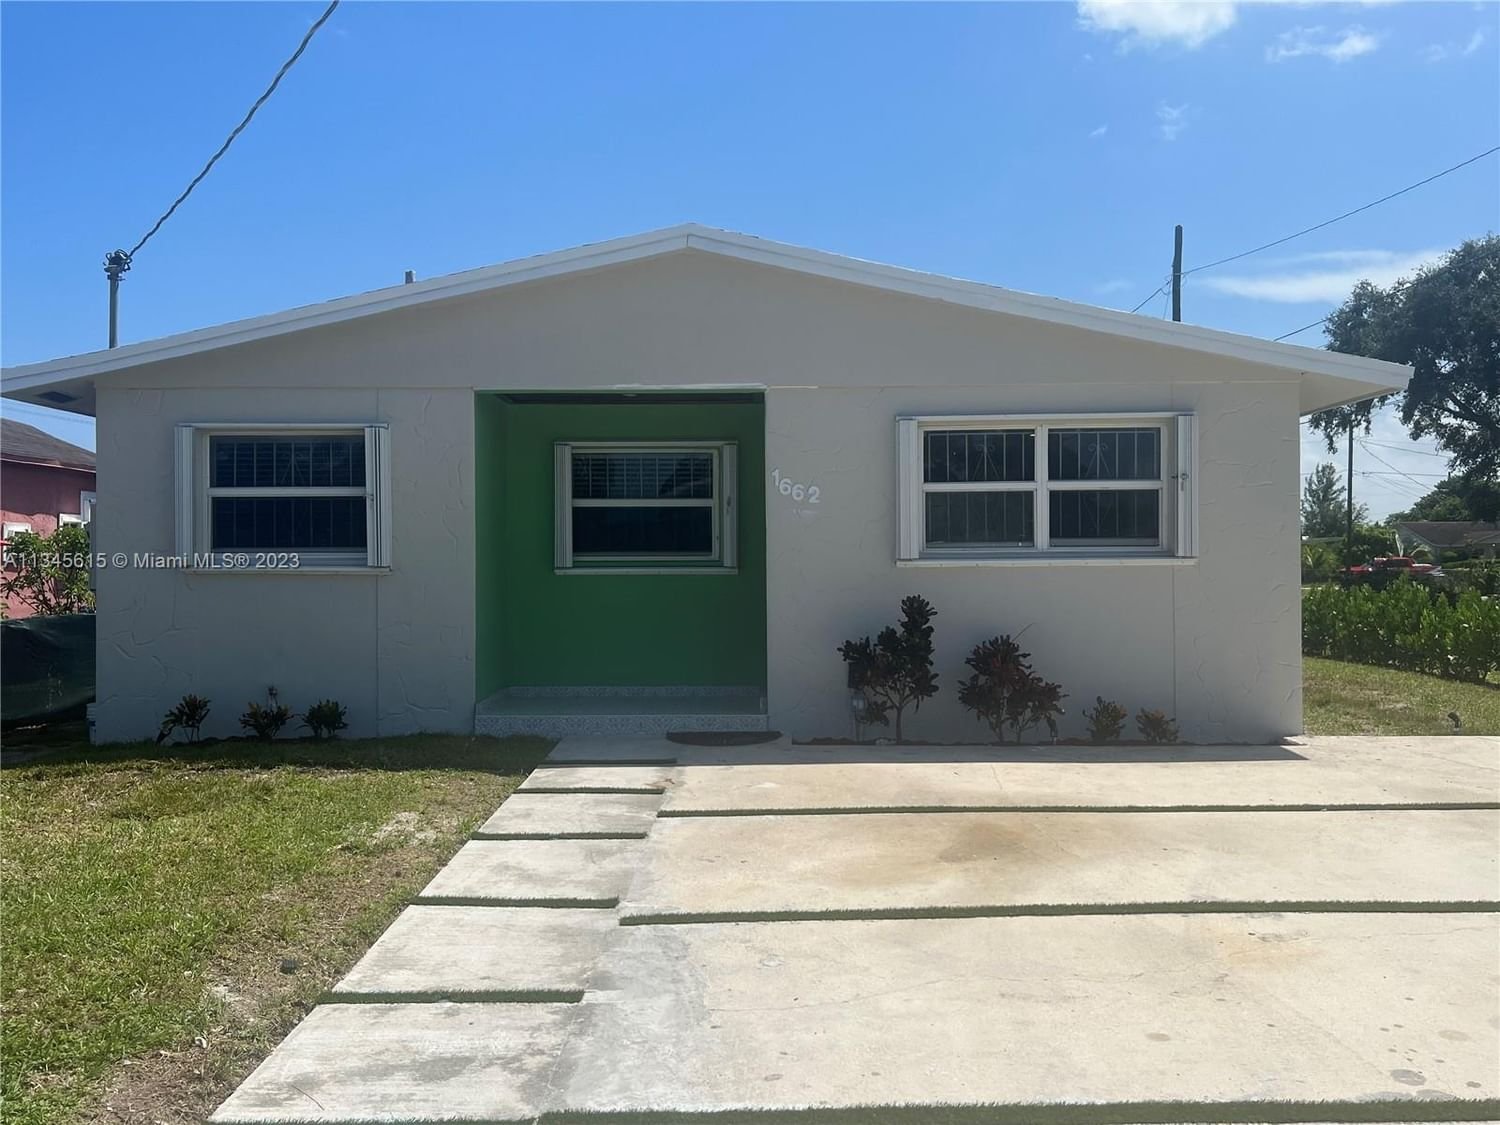 Real estate property located at 1662 152nd Ter, Miami-Dade County, Miami Gardens, FL